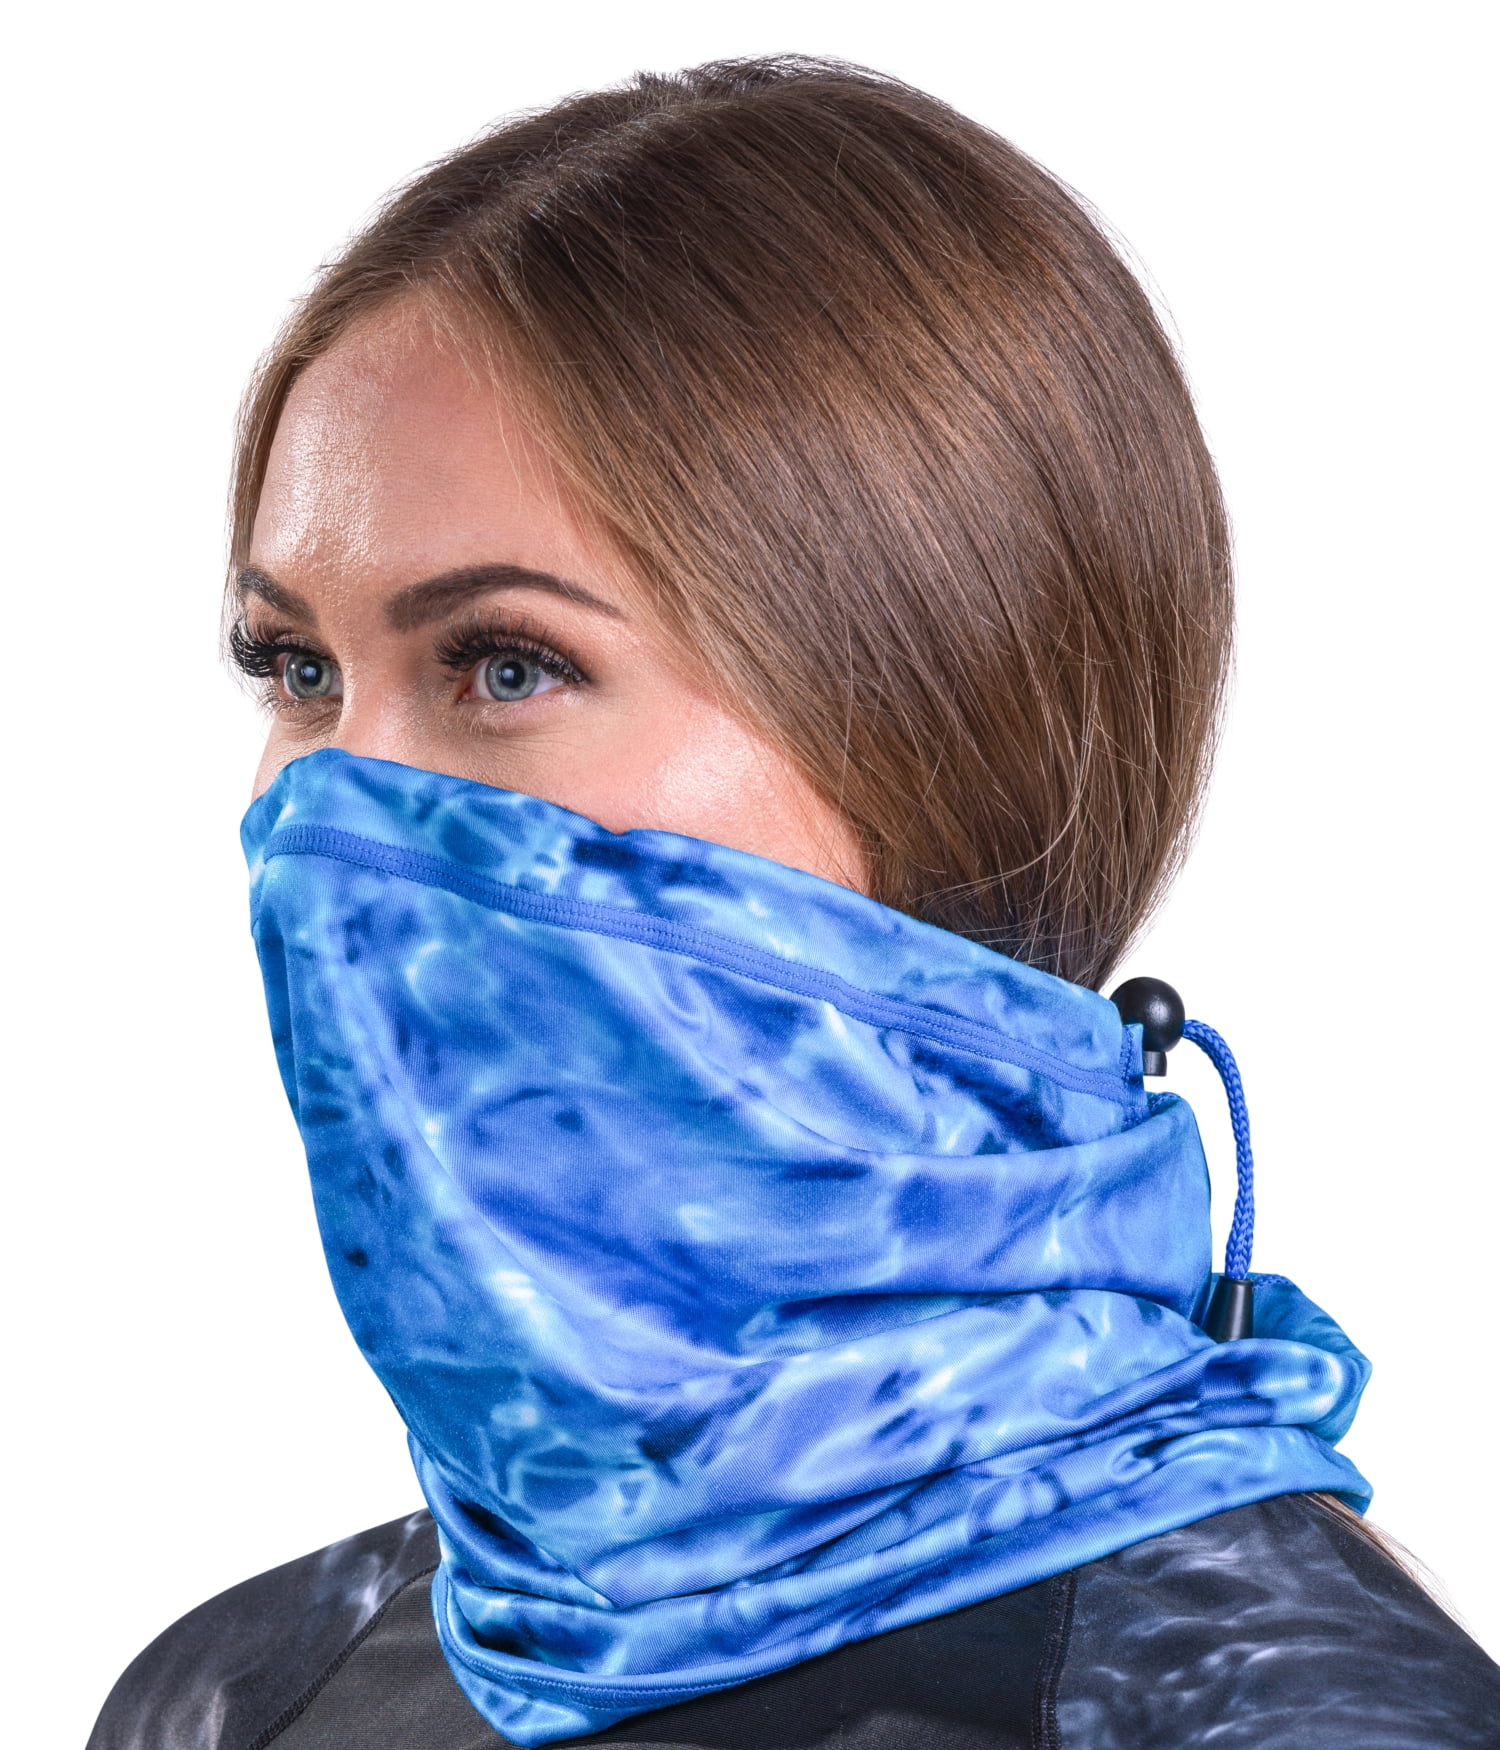 Details about   Neck Gaiter Sun Protection Face Cover Mask Cooling Neck Scarf Windproof Bandana 